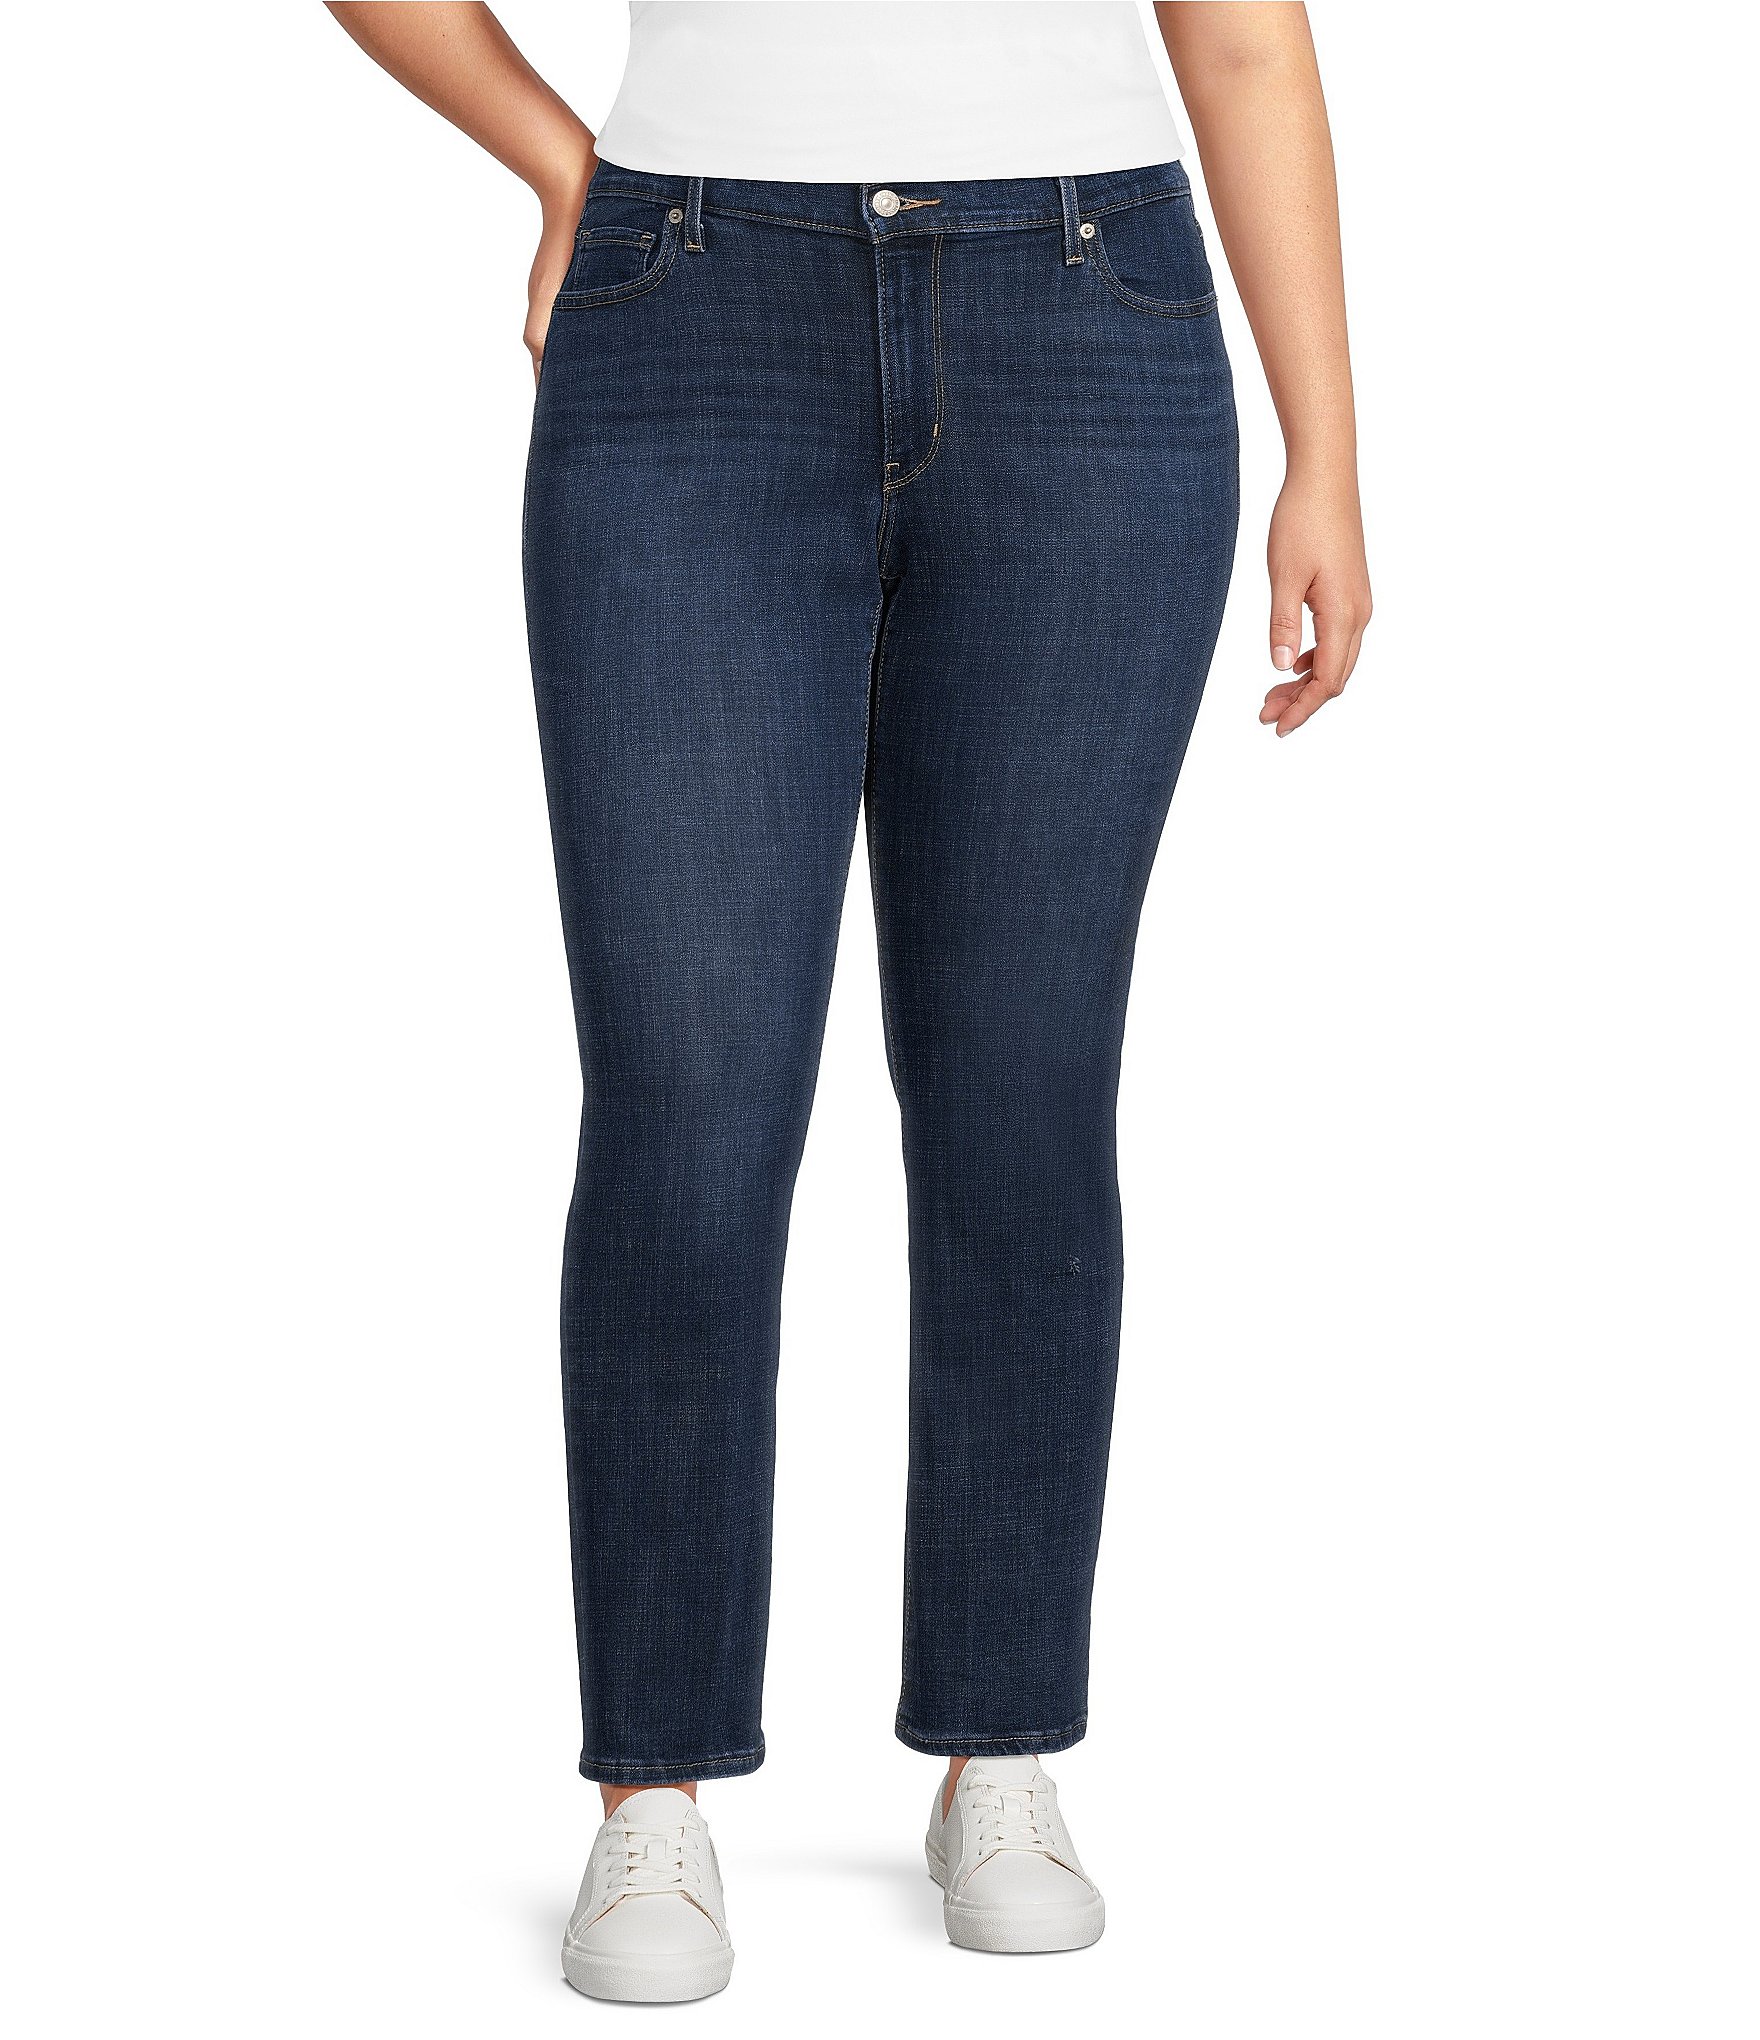 LEVI'S 414 Relaxed Straight Medium wash Jeans